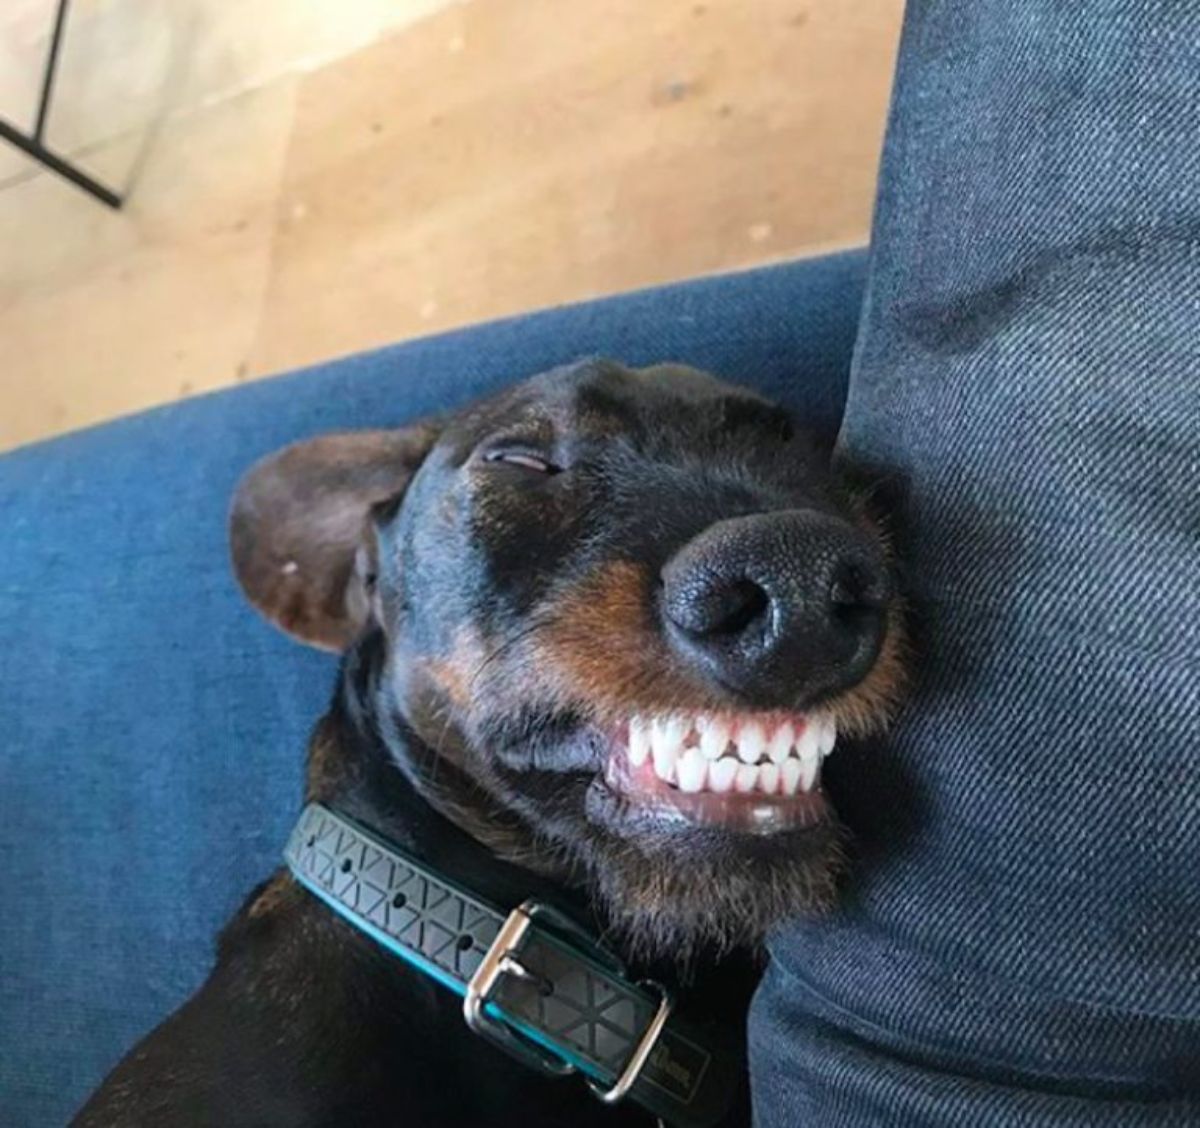 black dog laying down on a blue sofa with the teeth showing in a smile